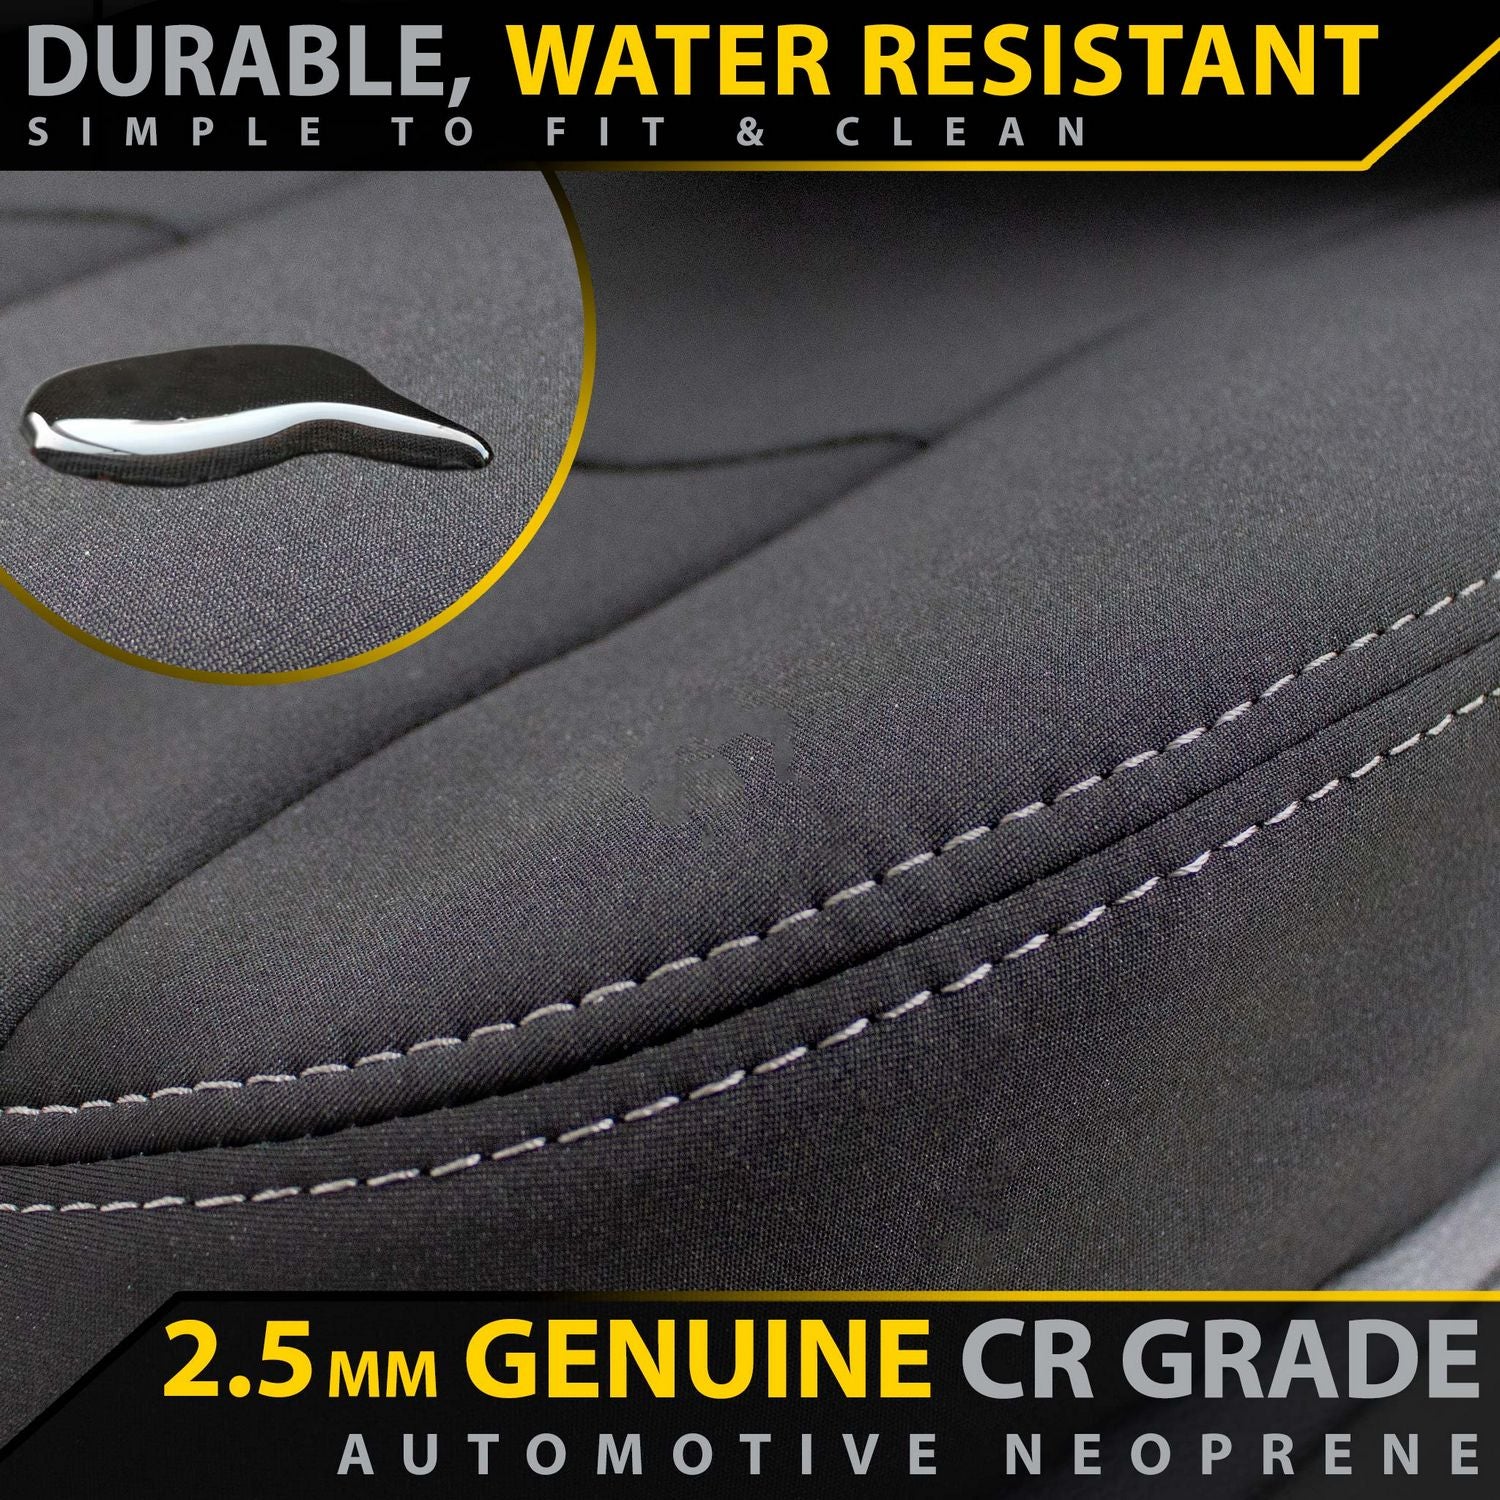 Volkswagen All-New Amarok Neoprene Rear Row Seat Covers (Made to Order)